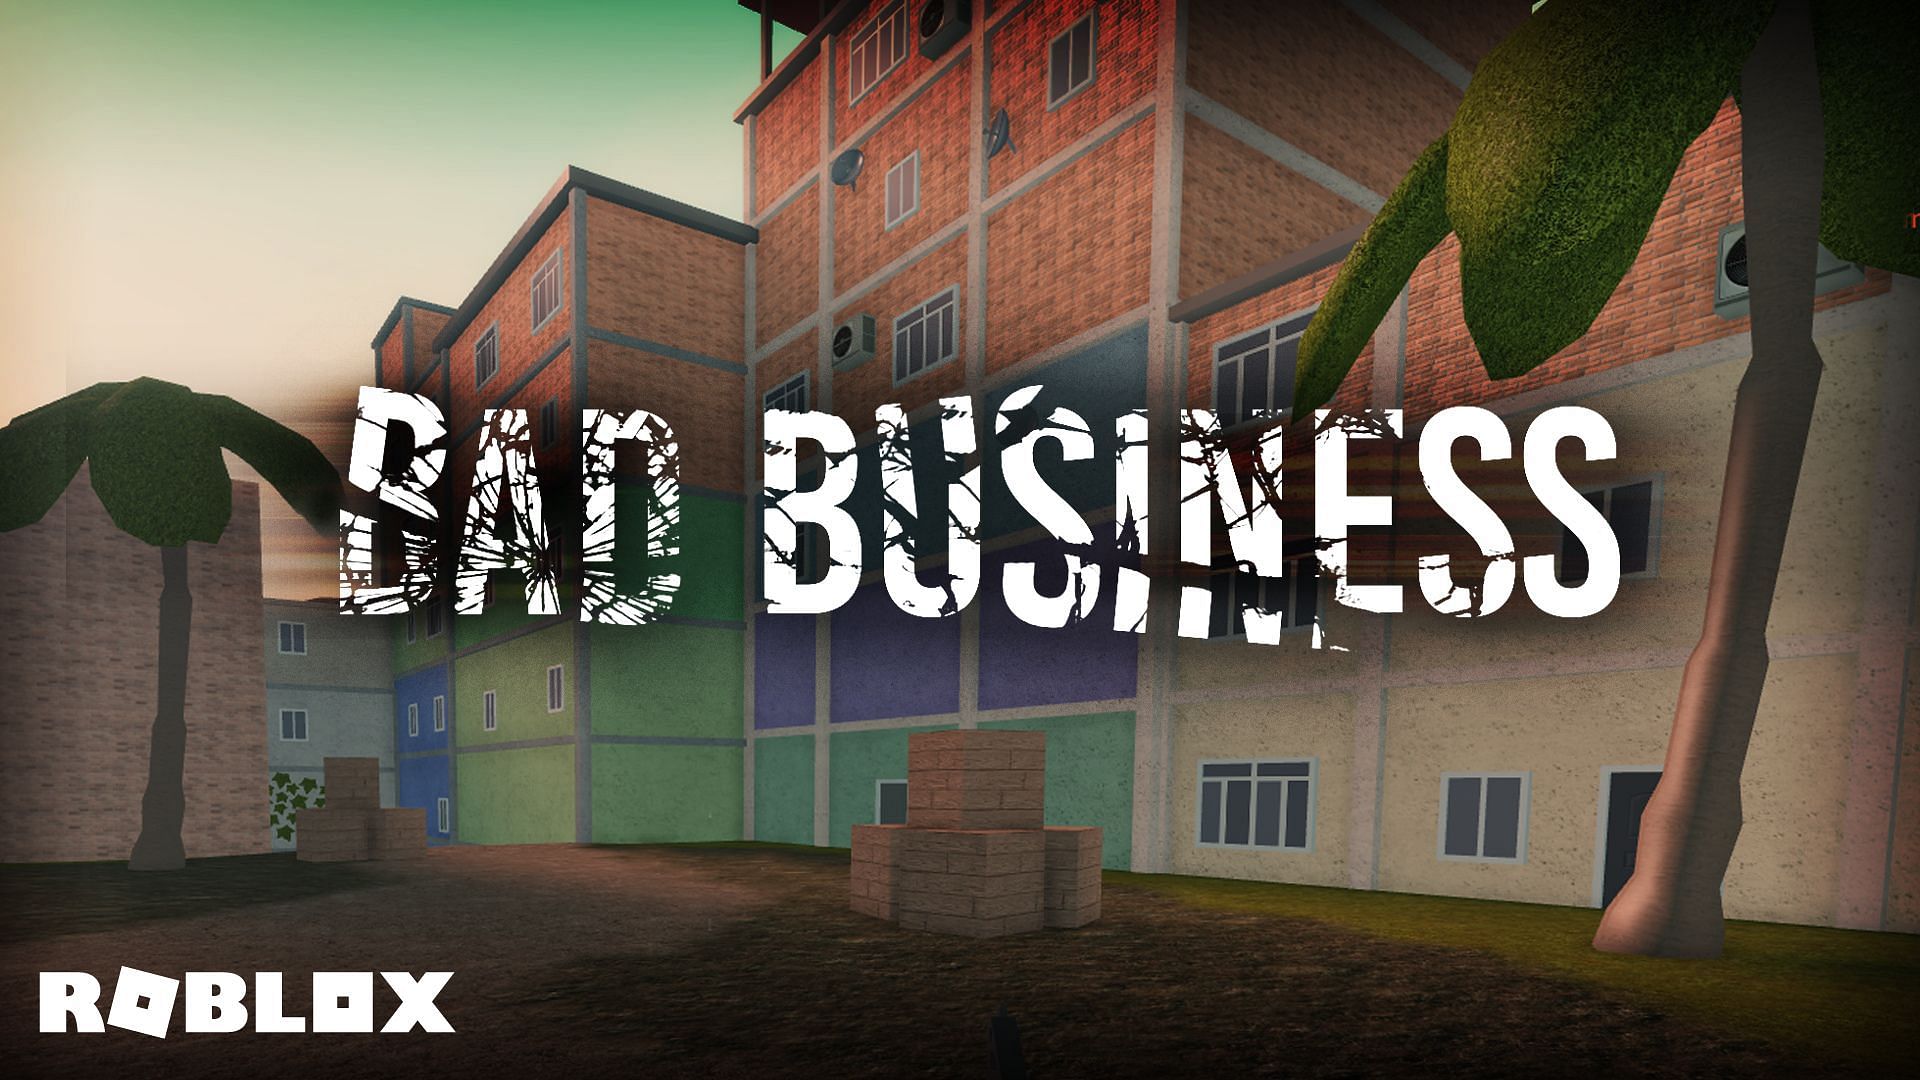 Roblox Bad Business code (June 2022): Free luck, stickers, charm, and more